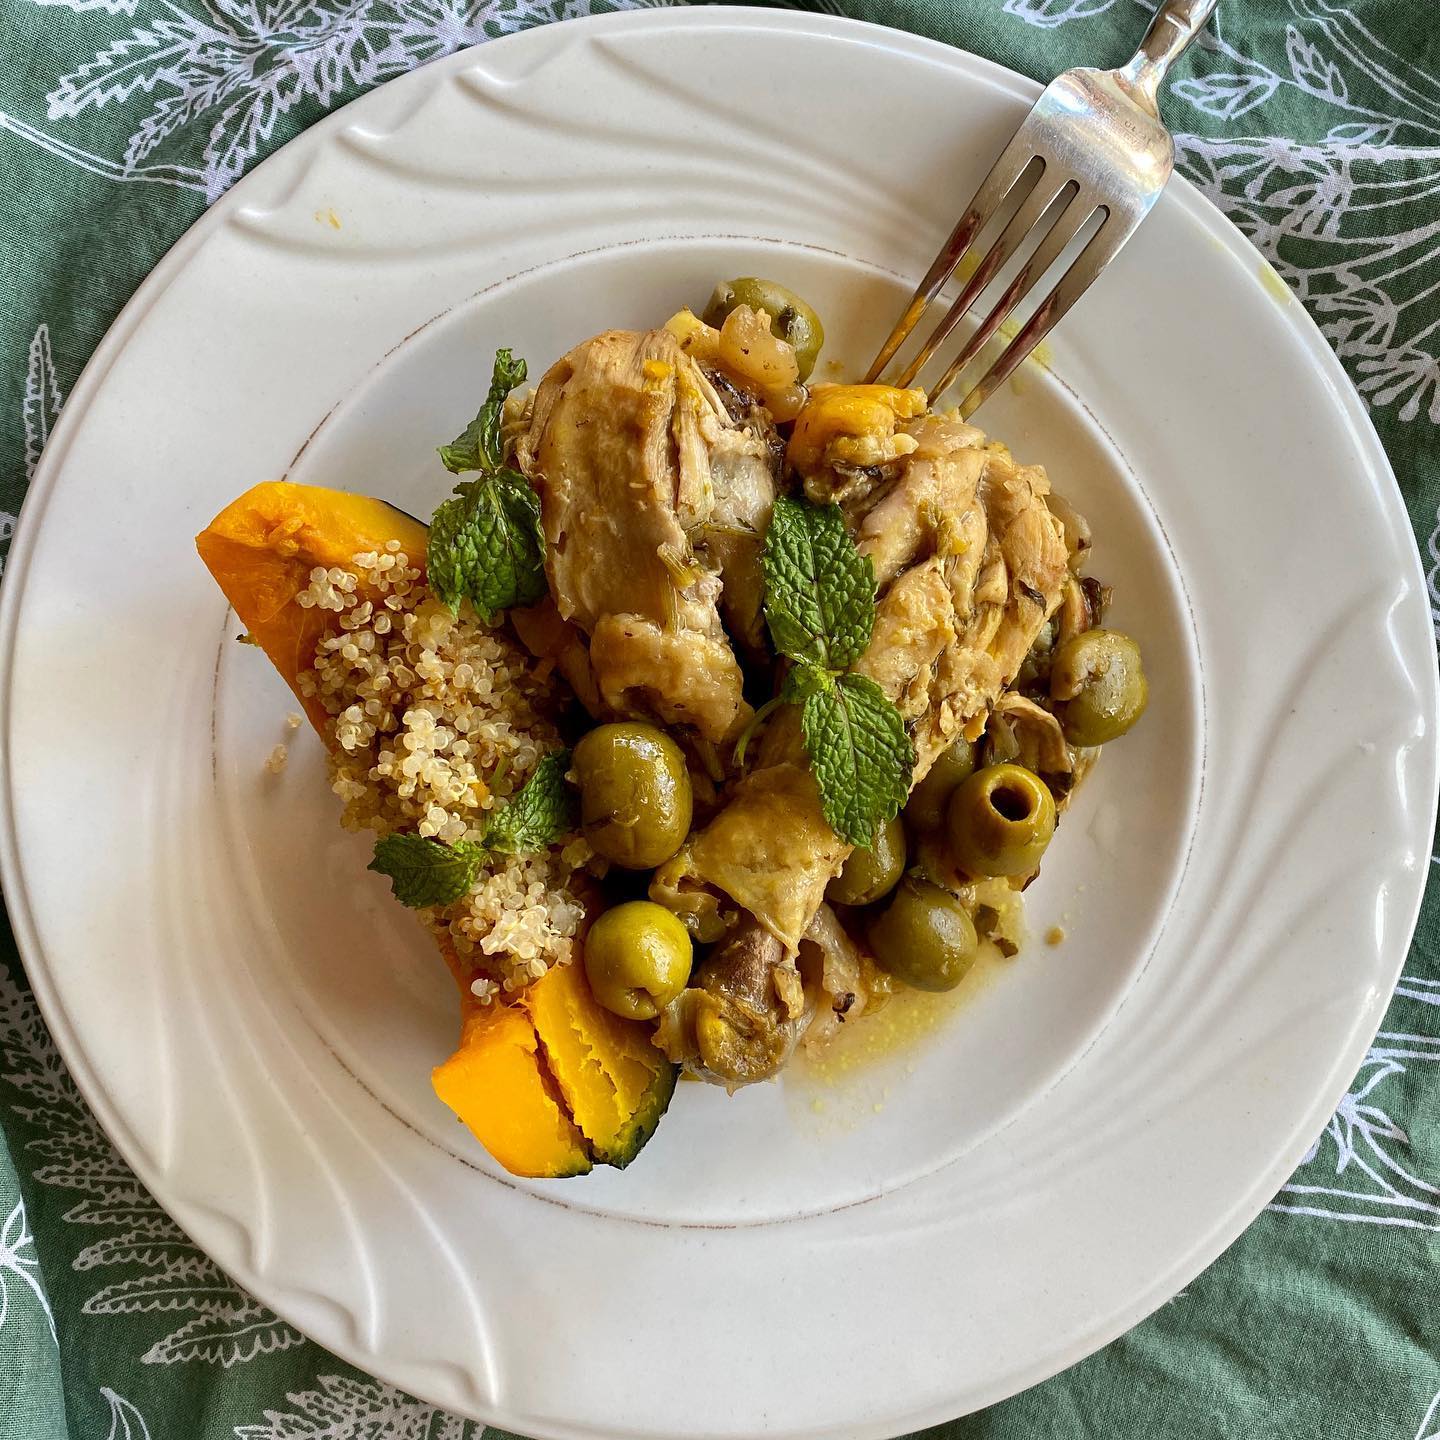 Lazy Paleo Dinner, a New Twist to Cook Moroccan Chicken Tagine Paired with Steamed Sweet Butternut Squash